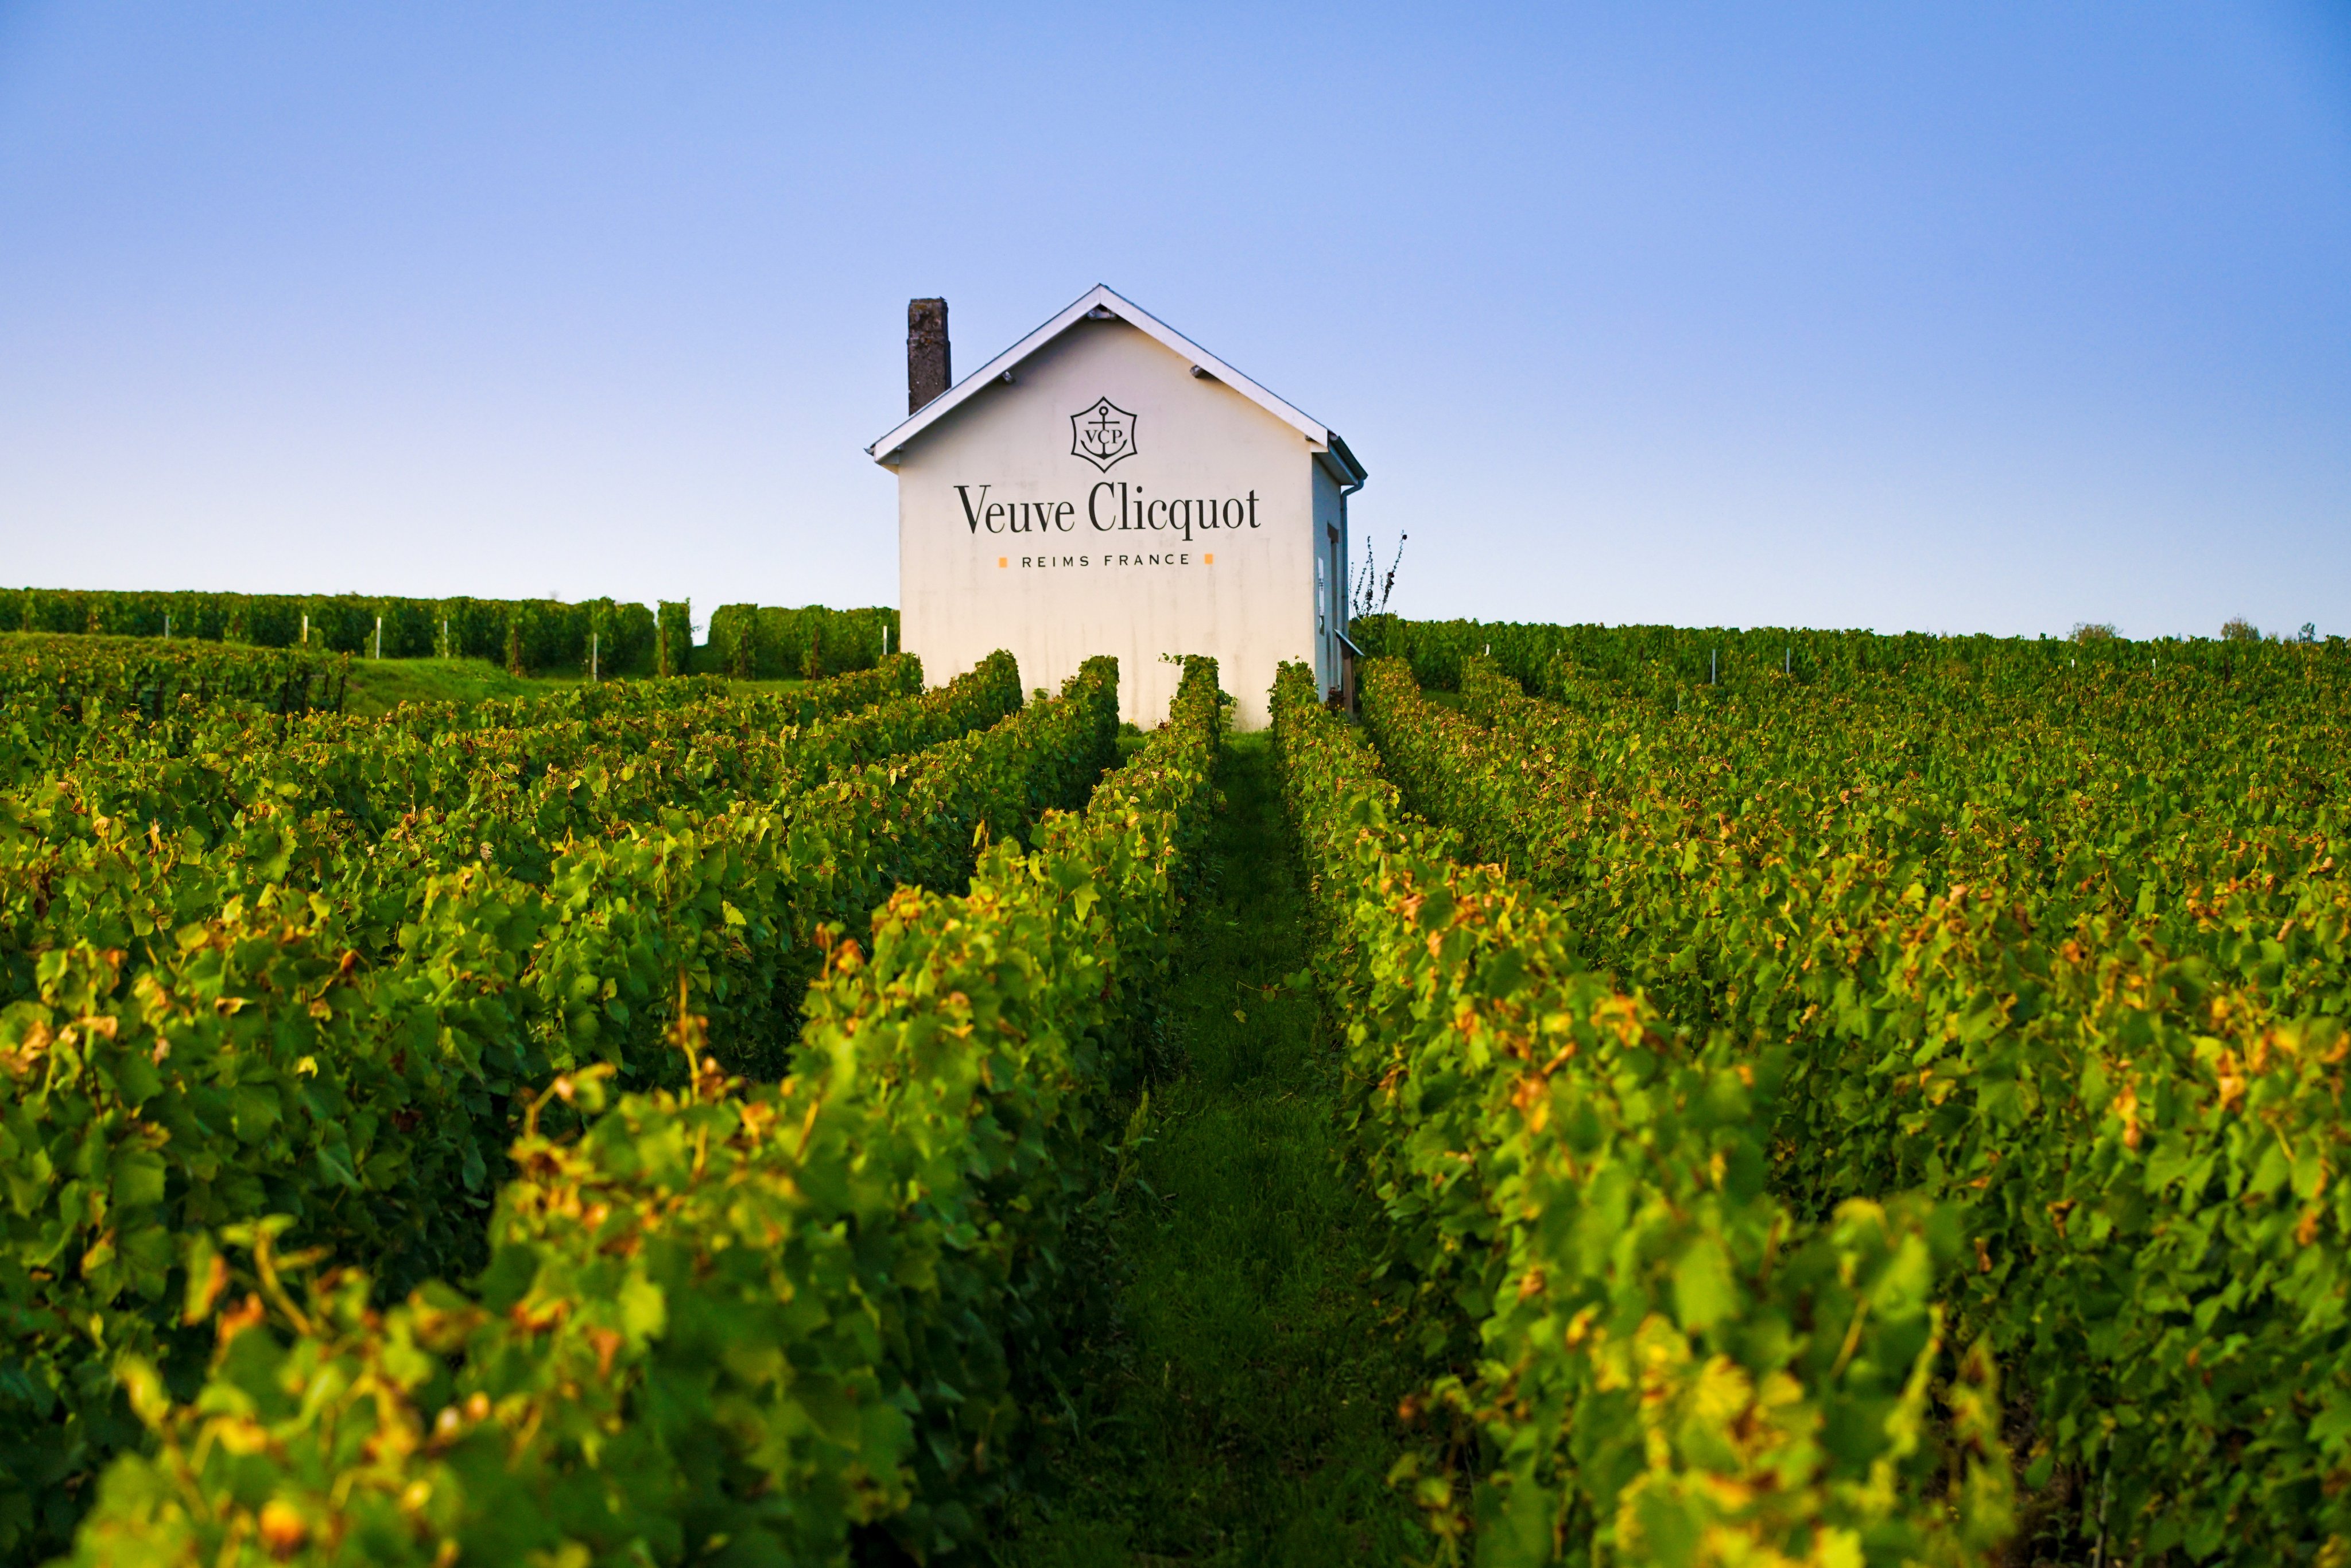 LVMH on X: Veuve Clicquot plants the vineyard with grass and